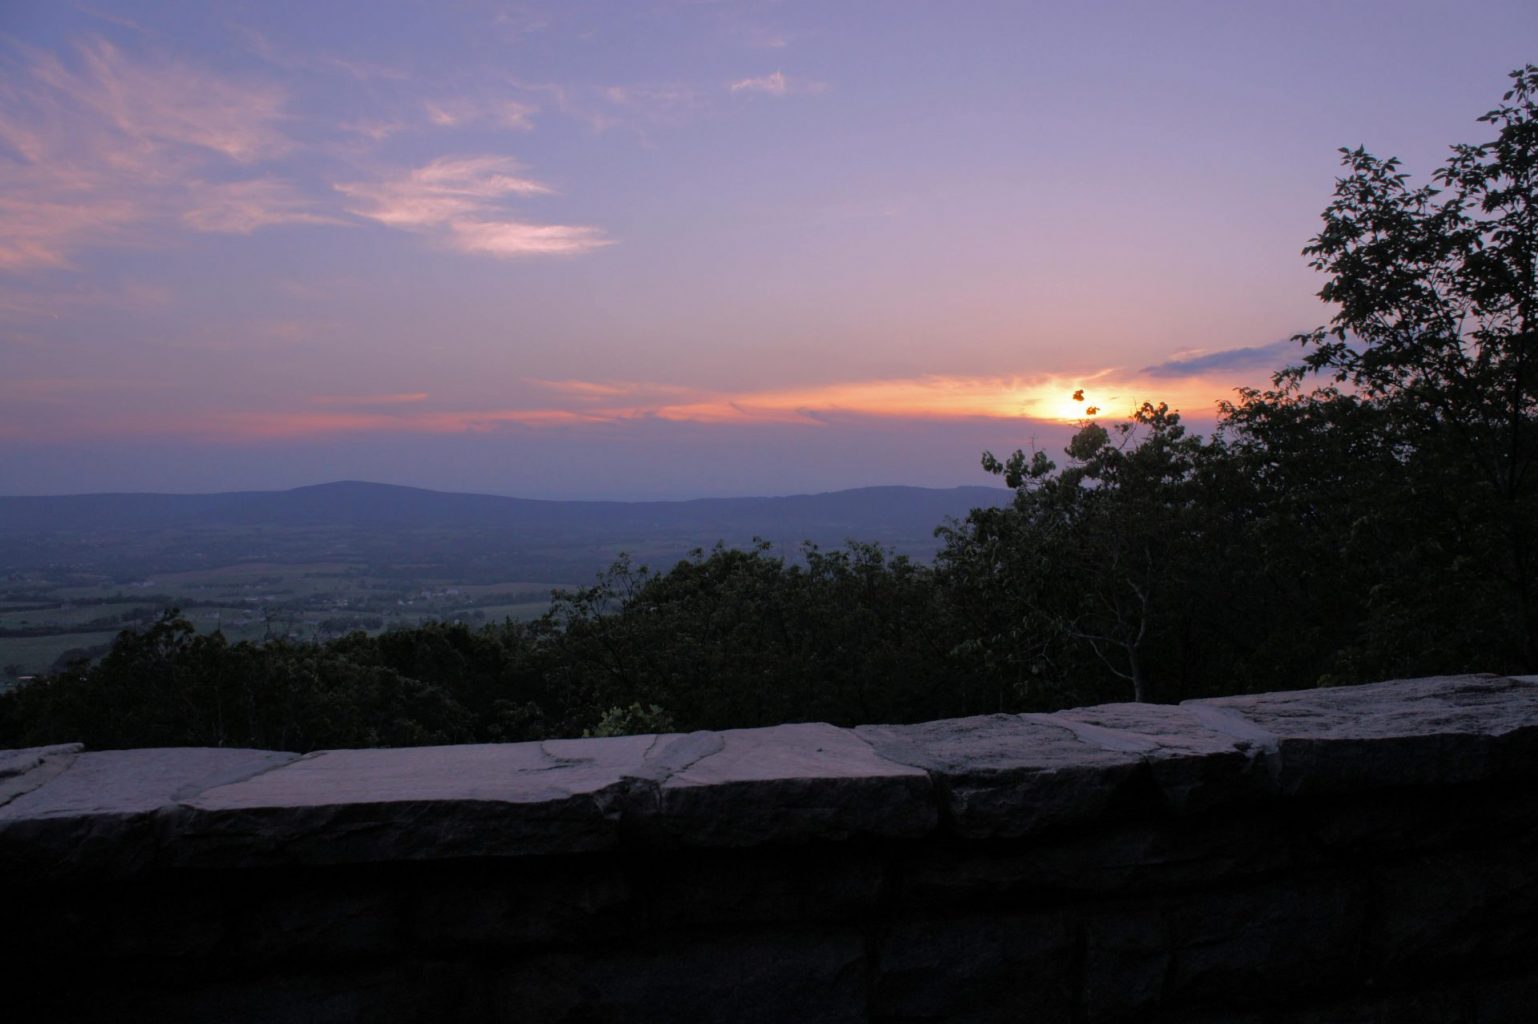 The sun setting over Middletown below at Gambrill State Park